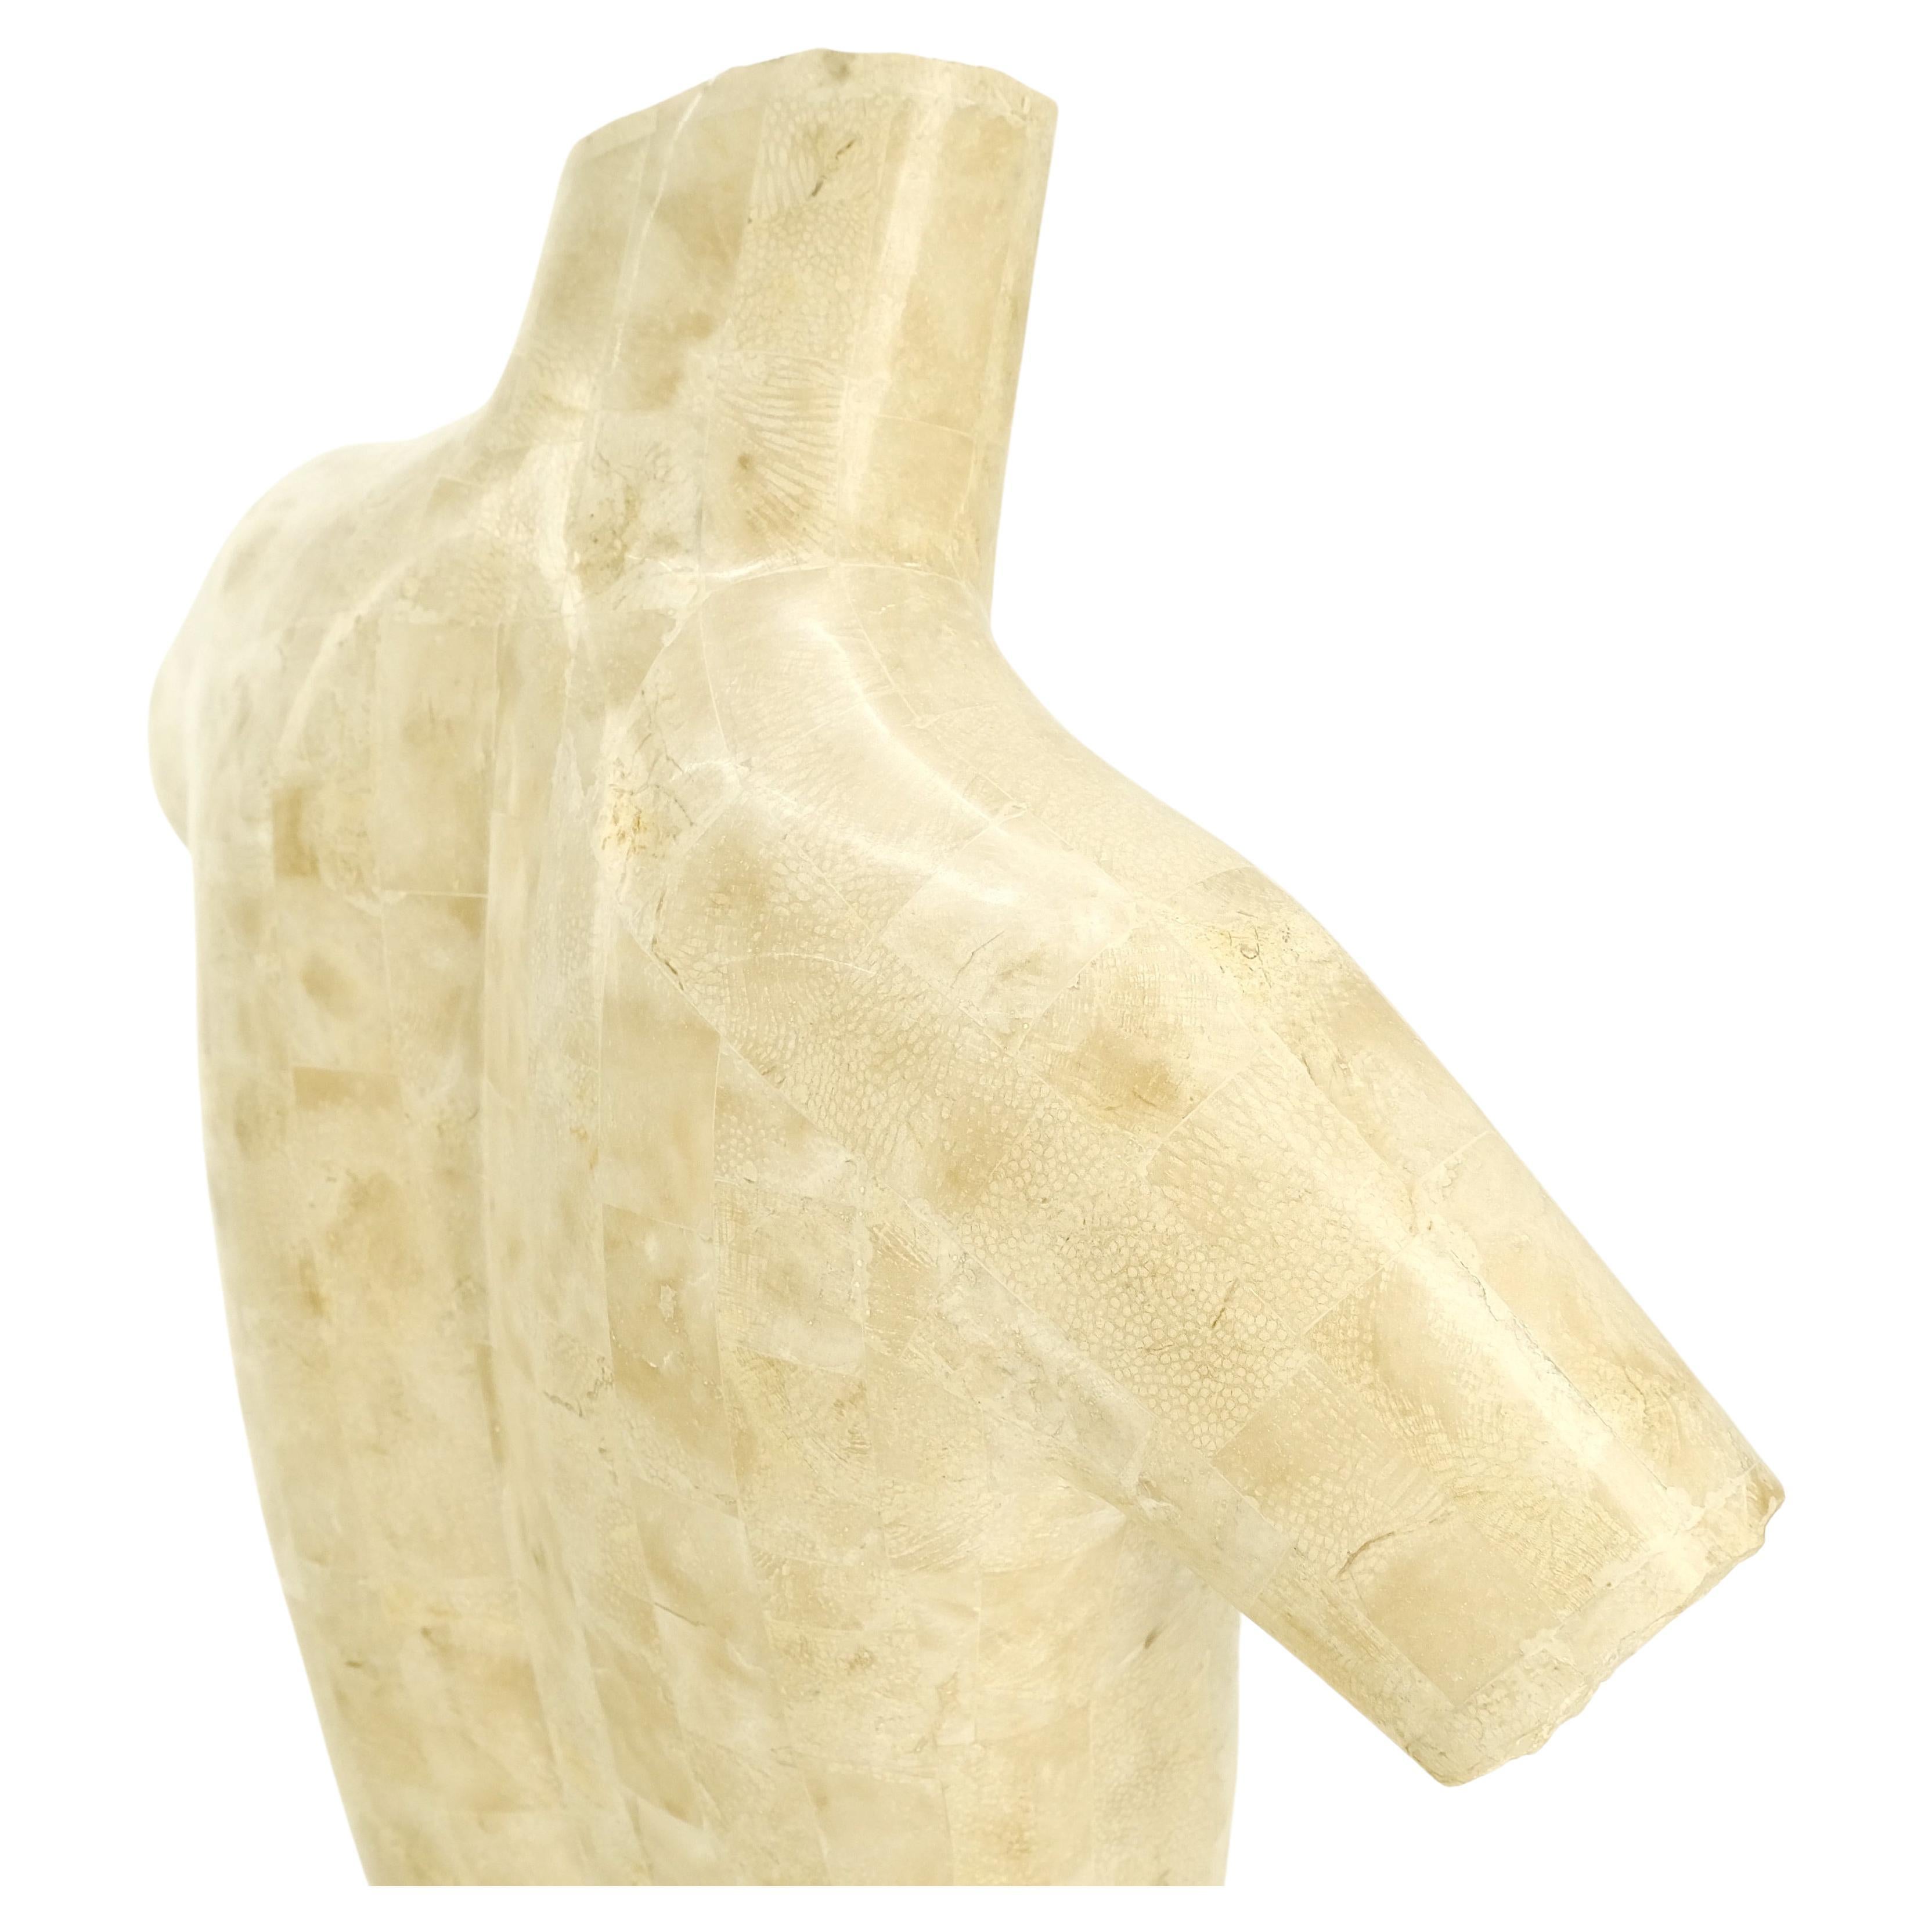 Tessellated Stone Marble Travertine Sculpture of Nude Female Torso Mint! For Sale 7